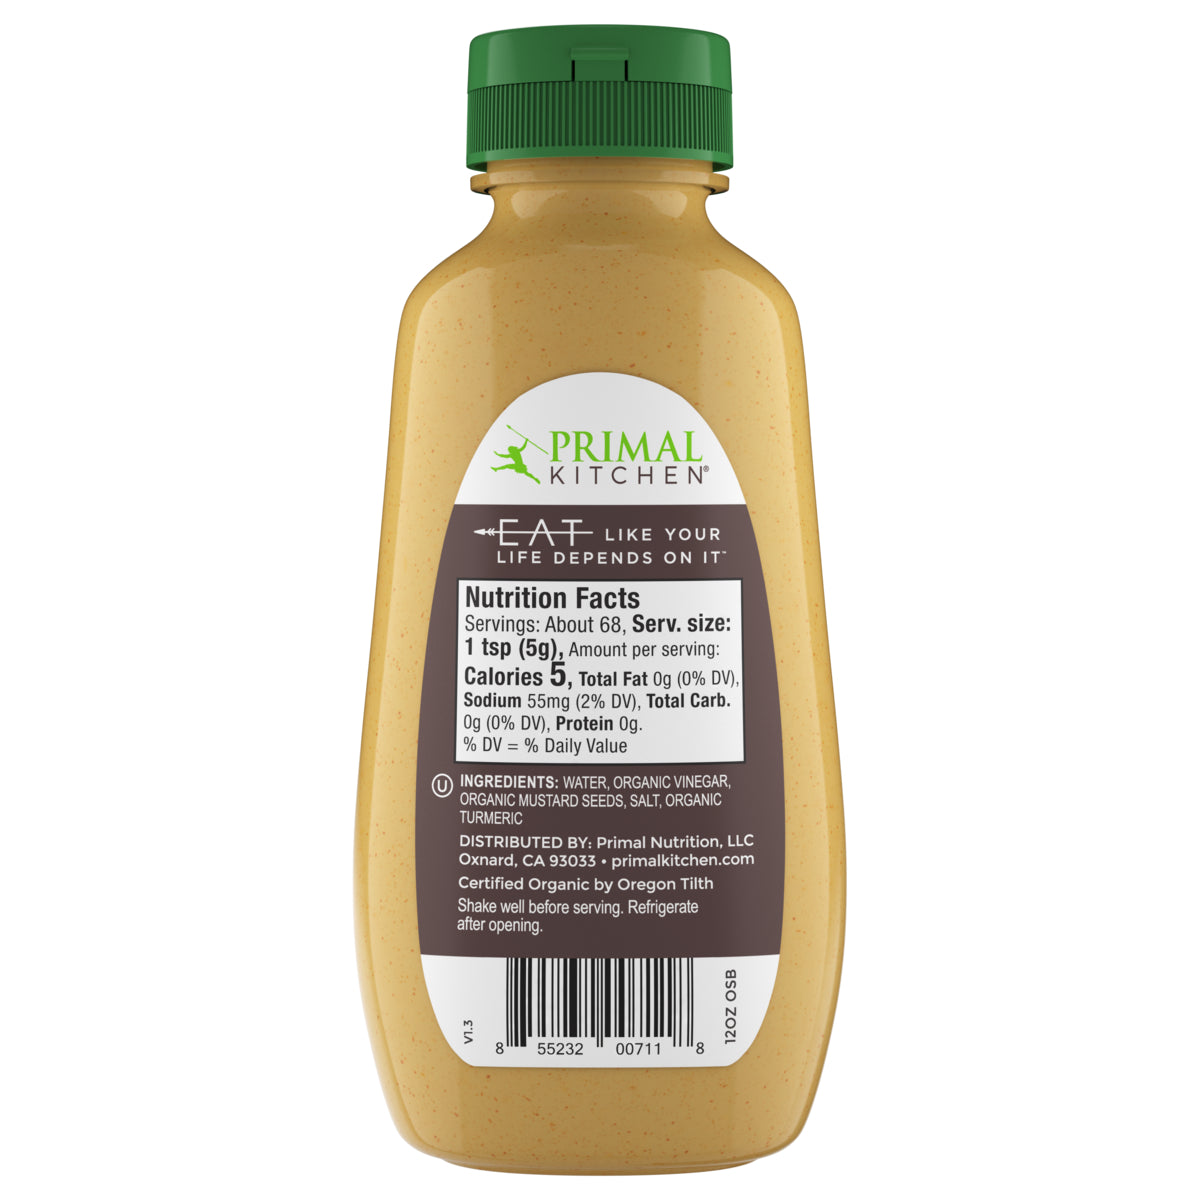 Backside of Primal Kitchen Organic Spicy Brown Mustard showing nutrition facts and ingredients list